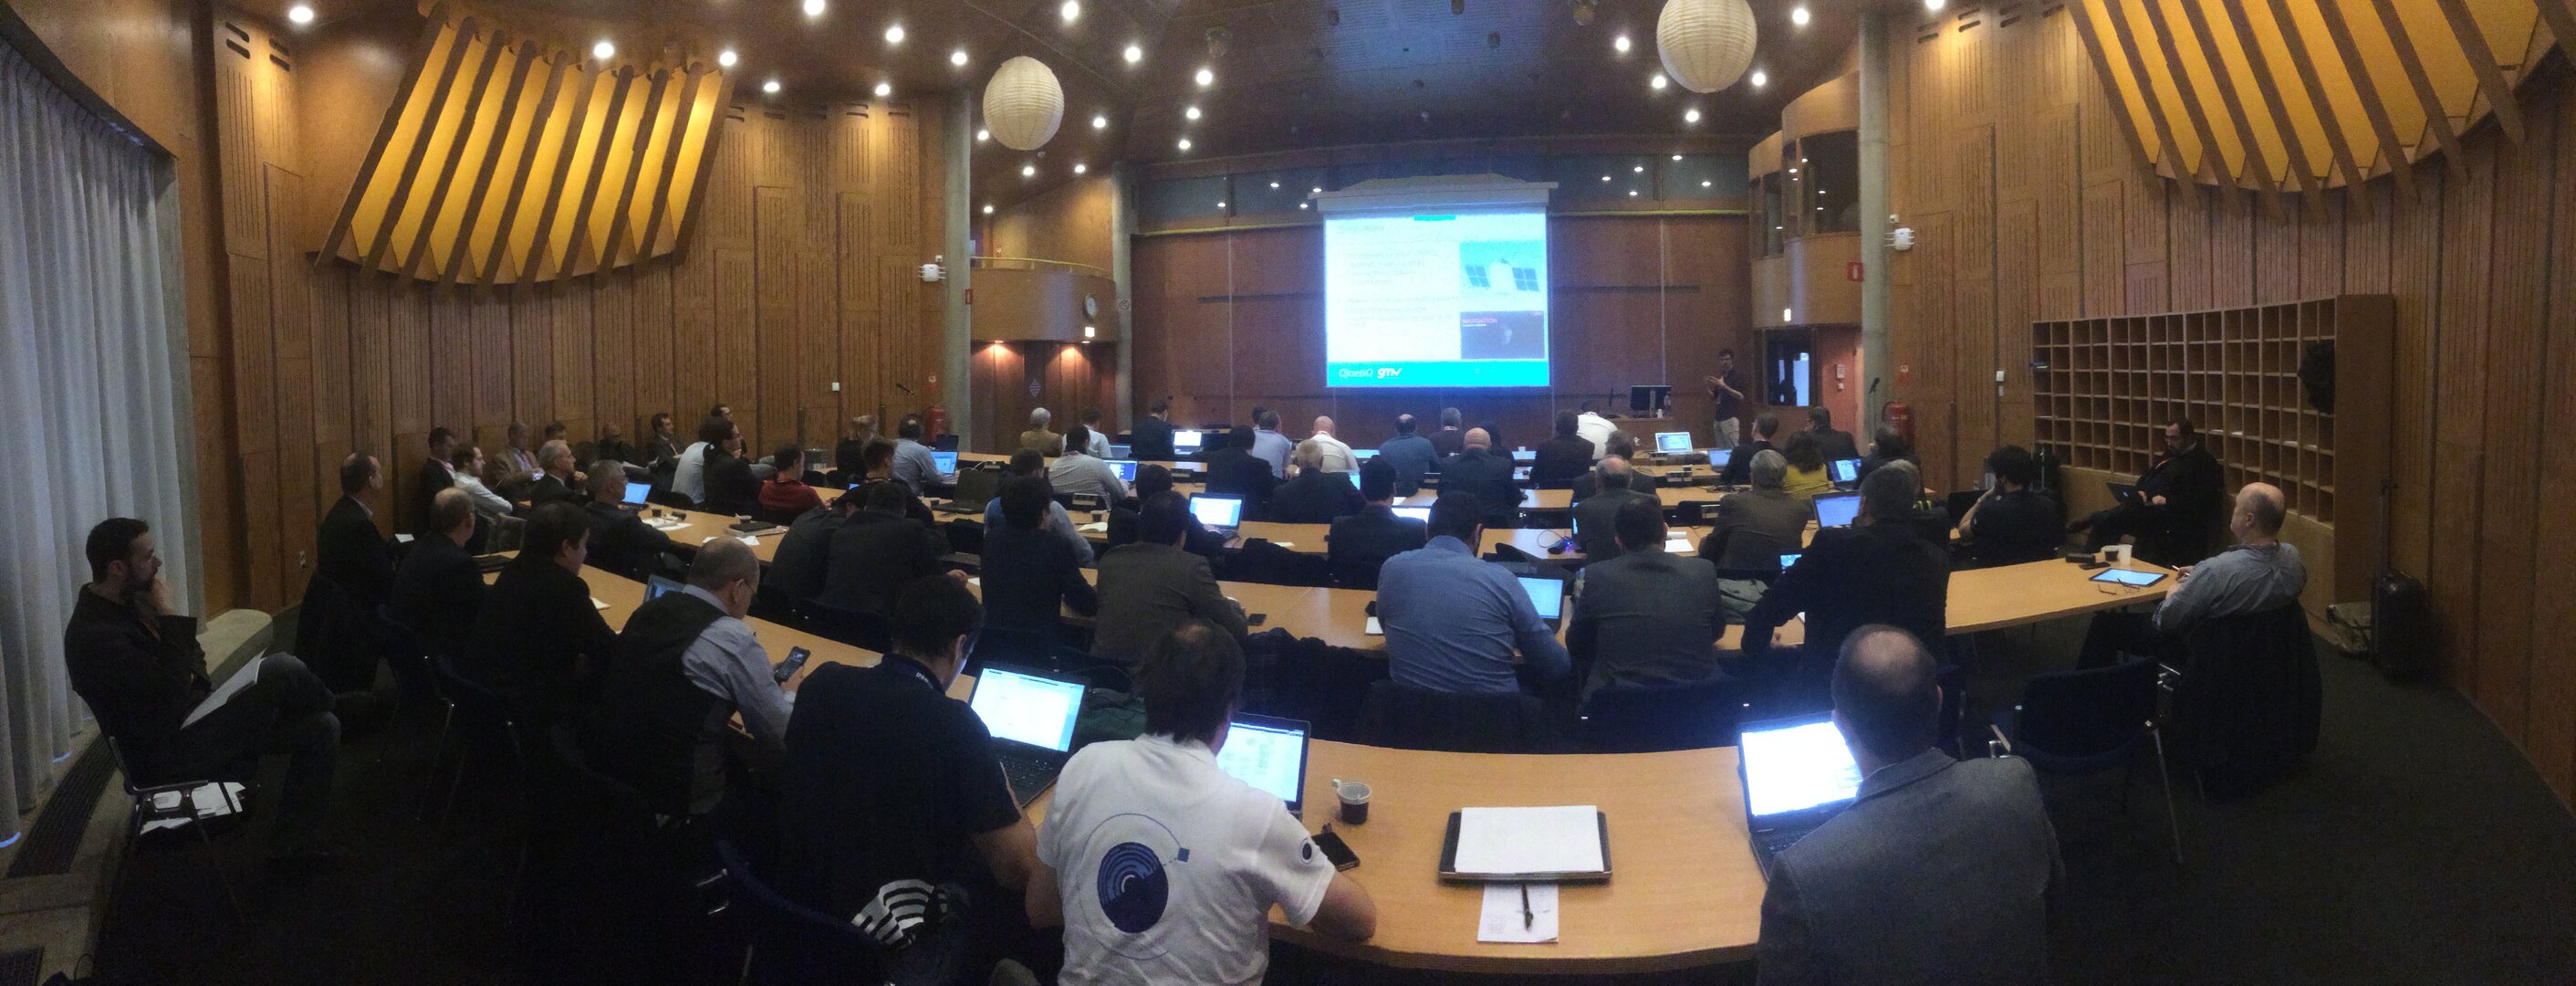 The AIM industry days held at ESTEC were well attended